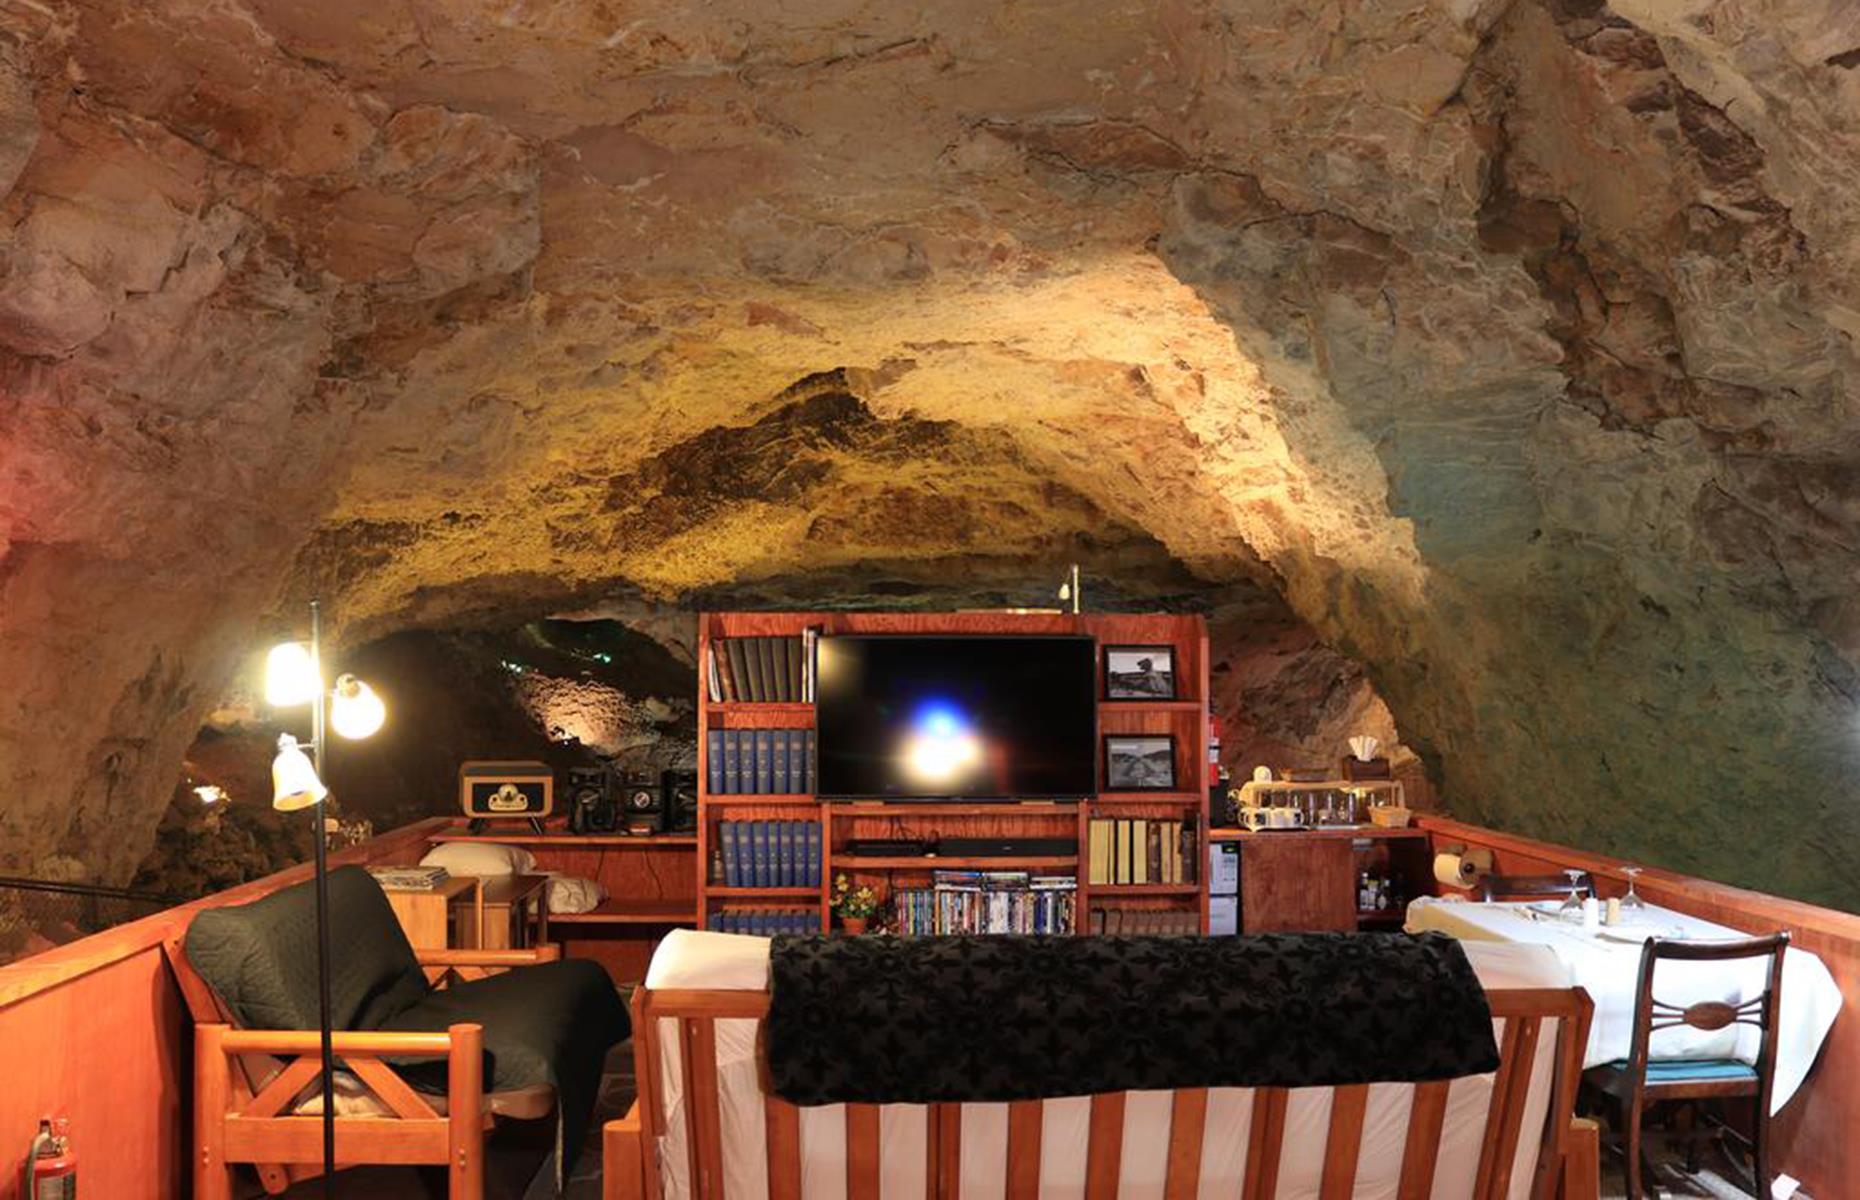 <p>Although most of this wonderfully retro inn is situated above ground, there is one special room hiding deep underground. The Cavern Suite sits 200 feet beneath the earth, and is billed as "the world's darkest, quietest, and deepest hotel room." There are two queen beds, a functional bathroom, a wide array of books, a TV, and even a kitchenette. While you're there, take the opportunity to visit the sprawling caverns themselves (although tours are temporarily unavailable).</p>